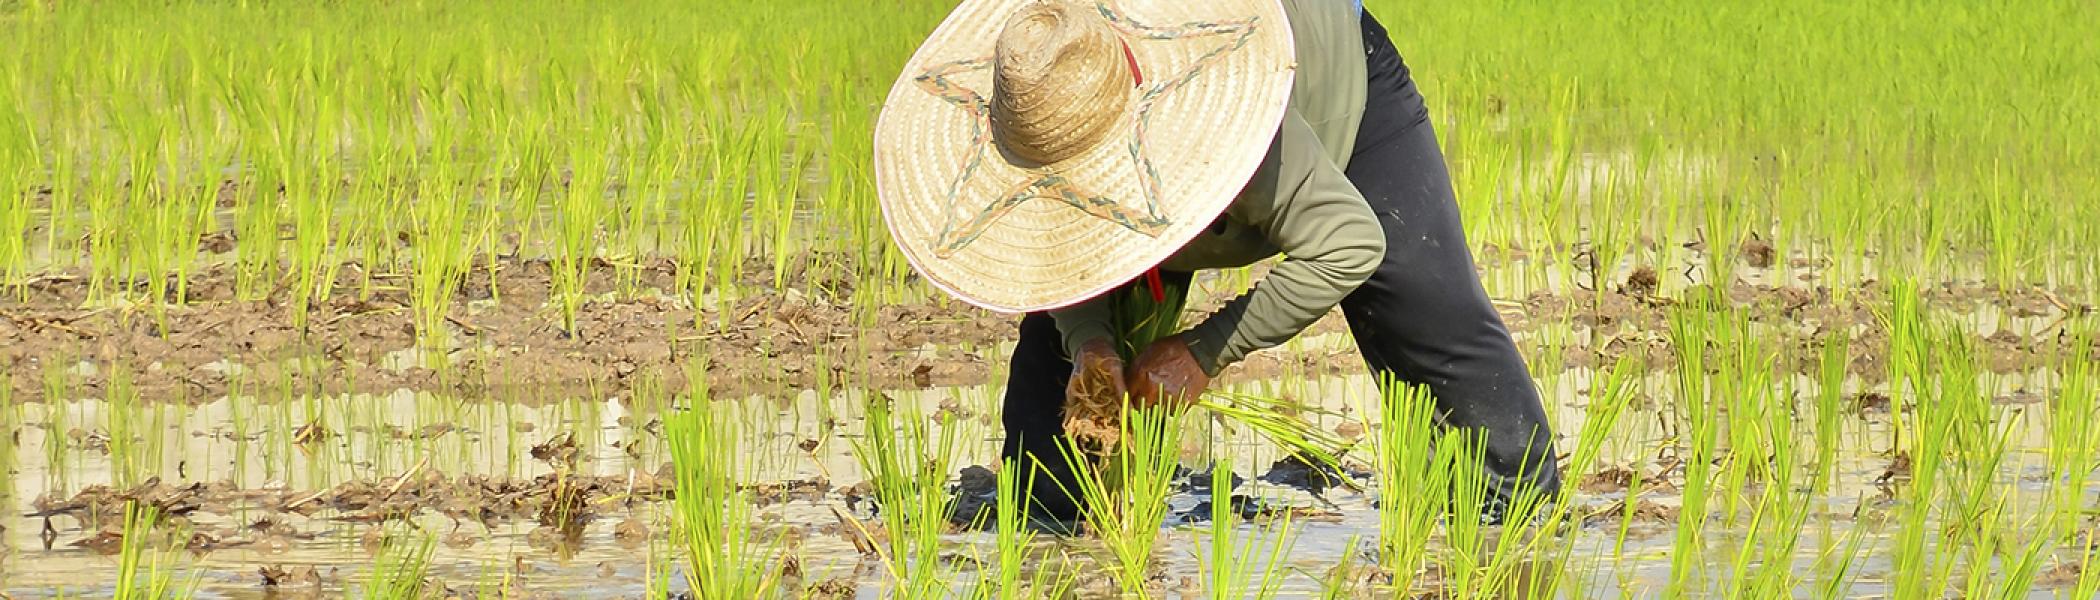 A farmer bent over in a rice field with a big straw hat on